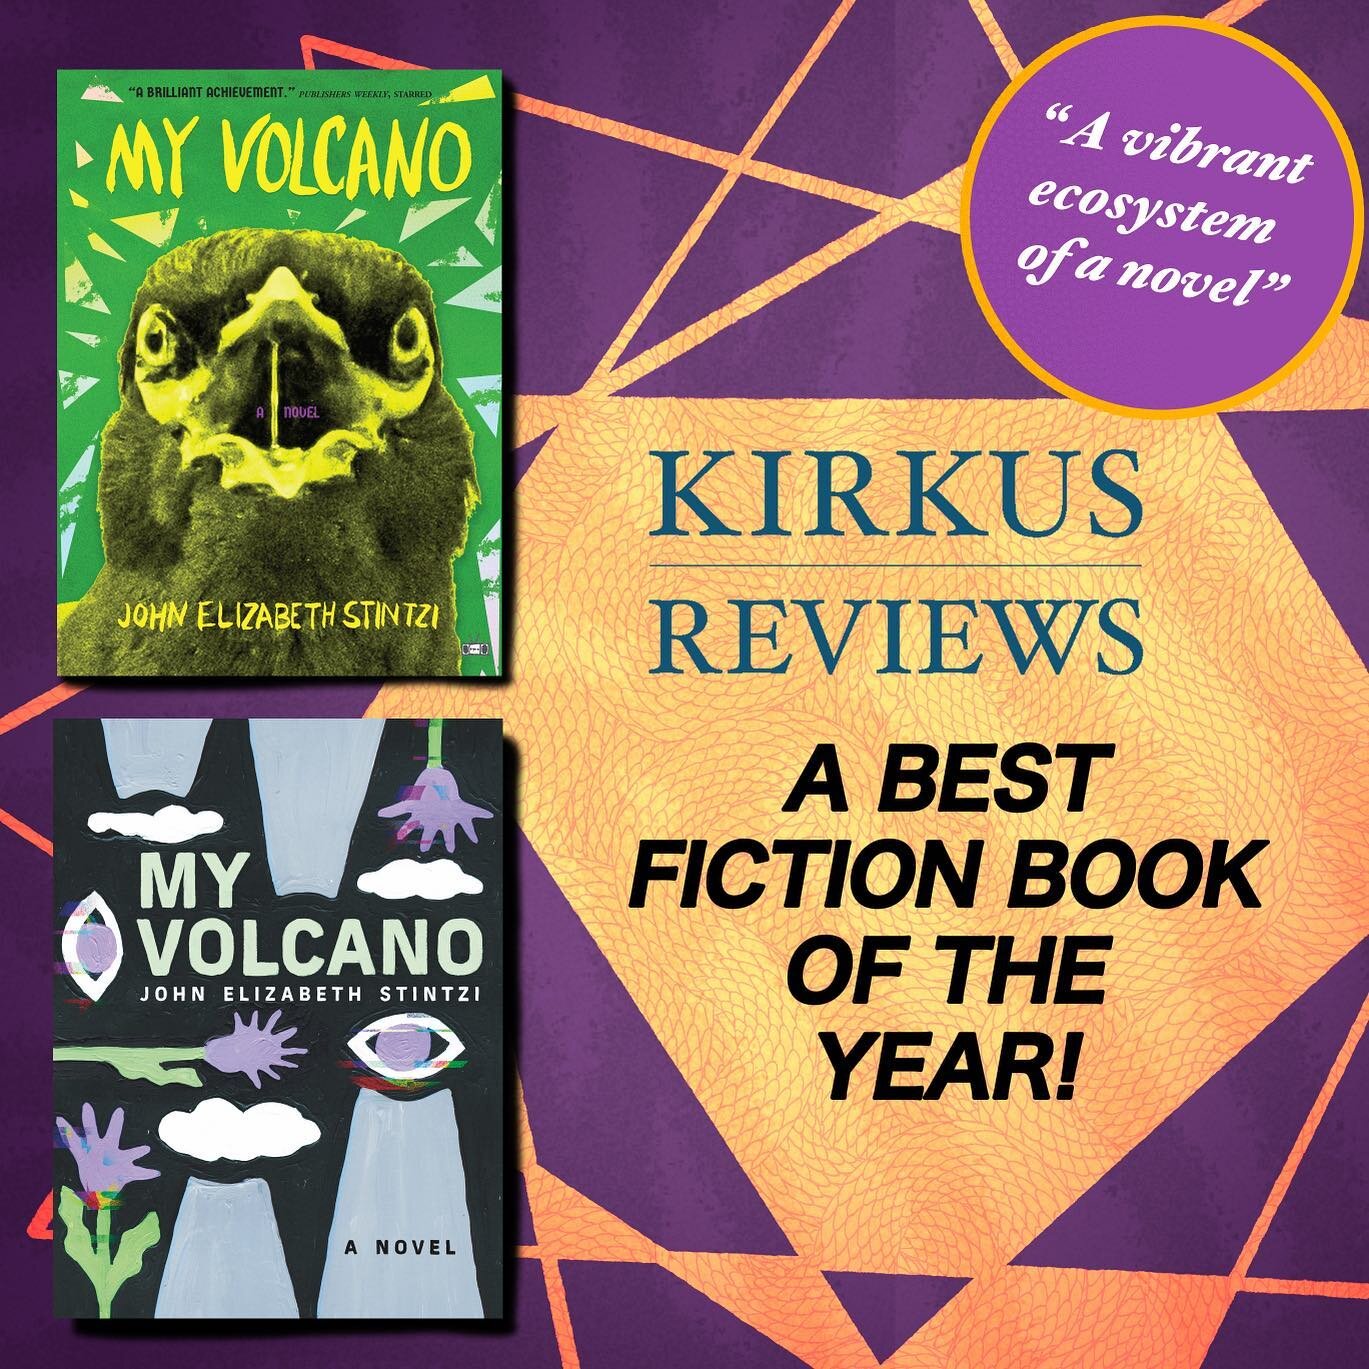 Jazzed to say that MY VOLCANO (@twodollarradio / @arsenalpulp) was named a BEST FICTION BOOK OF THE YEAR by @kirkus_reviews. Check the link in my bio! (You can filter for &ldquo;Best Fiction Voices of 2022&rdquo; to find me faster!)